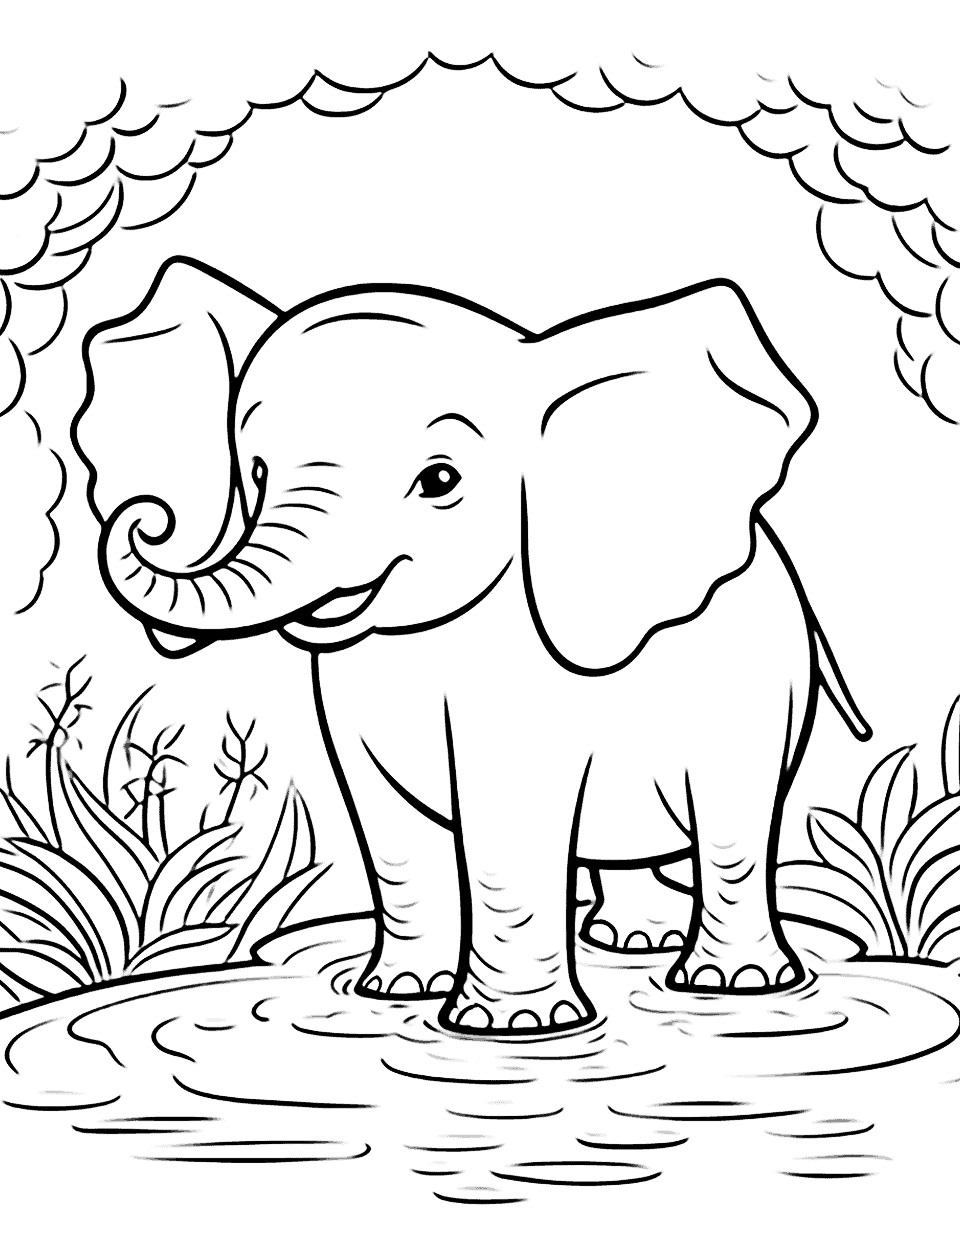 Jungle Elephant Bath Animal Coloring Page - An elephant playfully splashing water on itself in a jungle river.